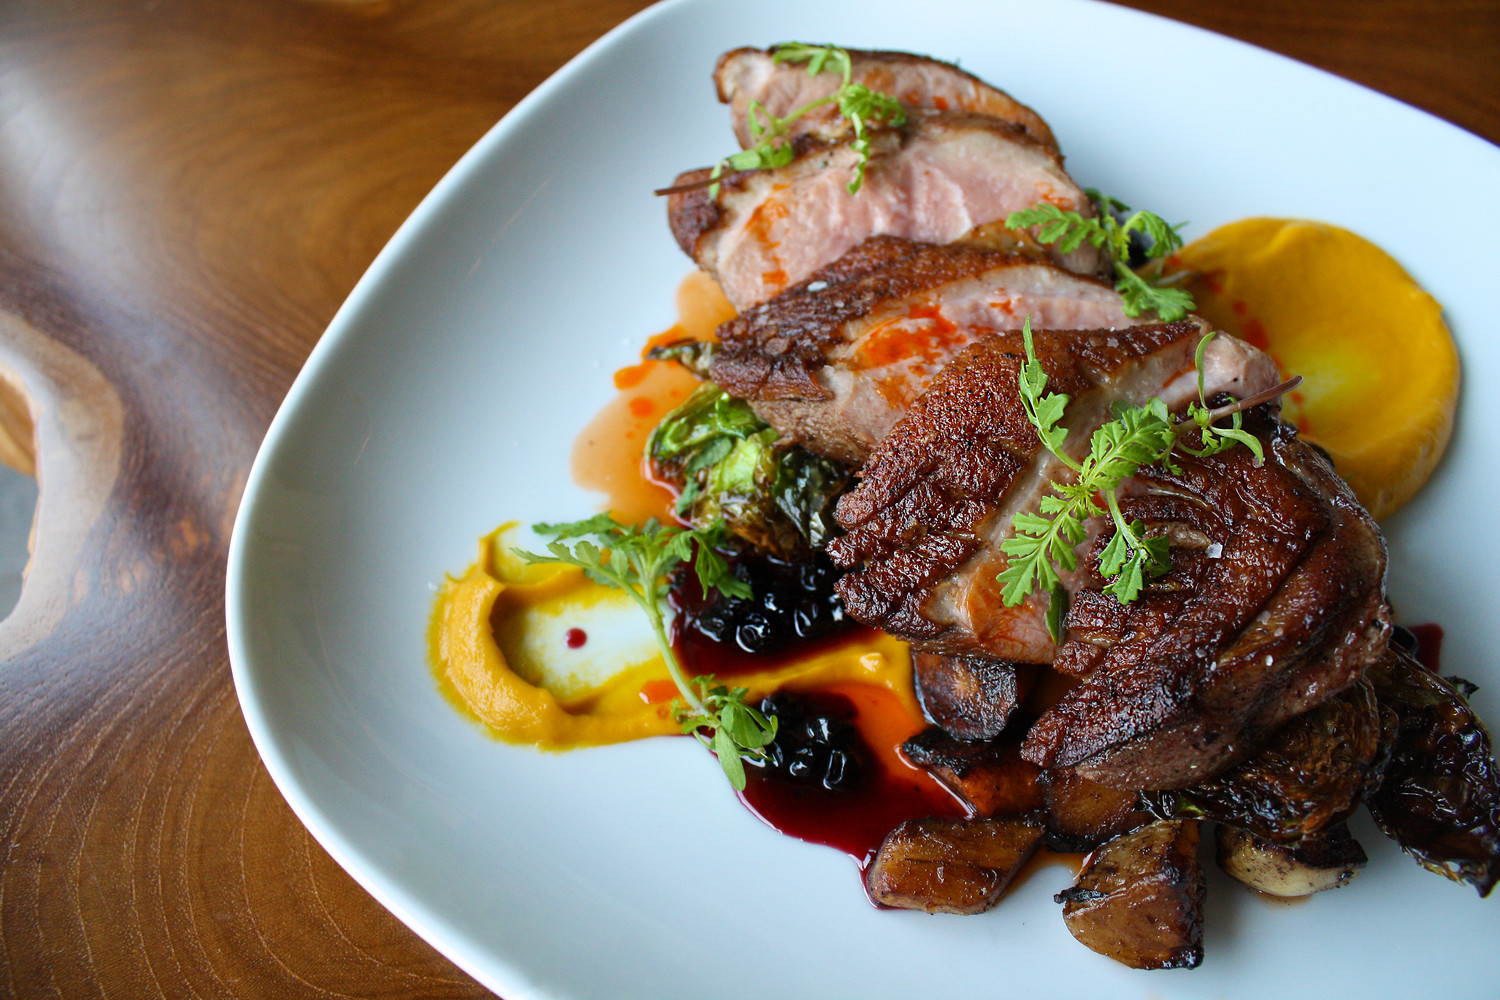 Town Hall’s Duck Breast with crispy Brussels sprouts, roasted root vegetable purée, huckleberry gastrique and paprika oil